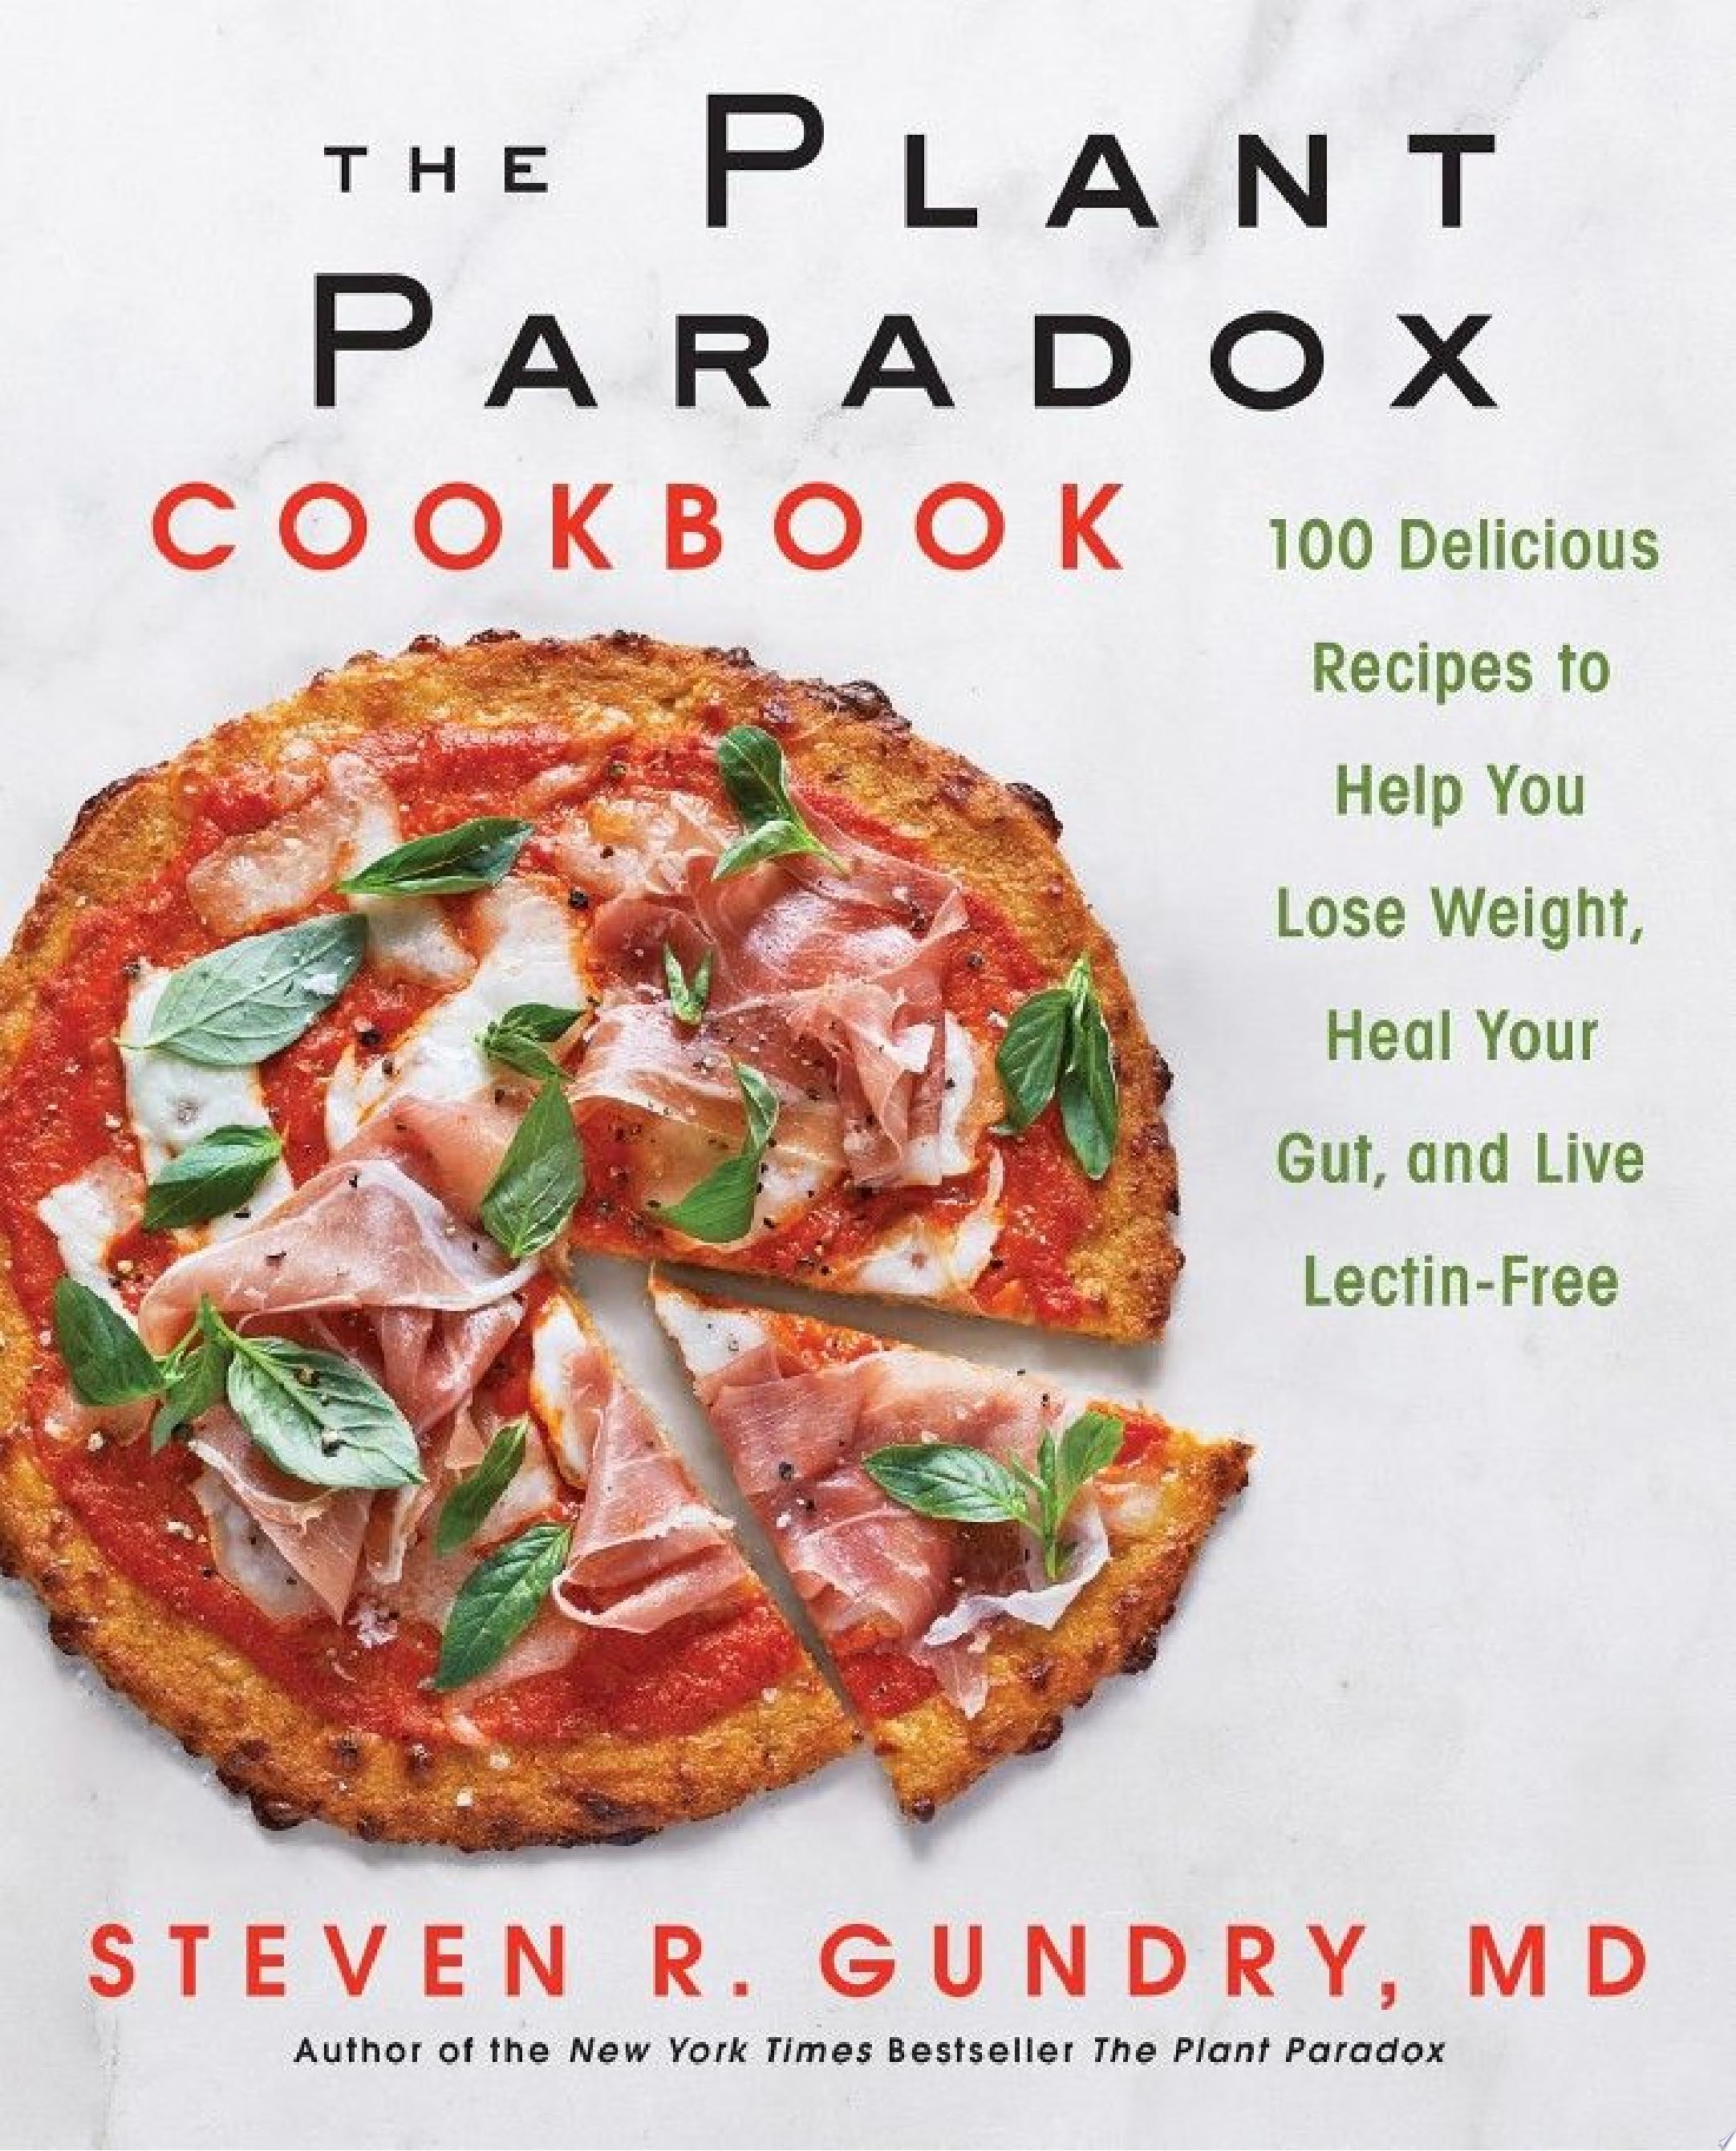 Image for "The Plant Paradox Cookbook"